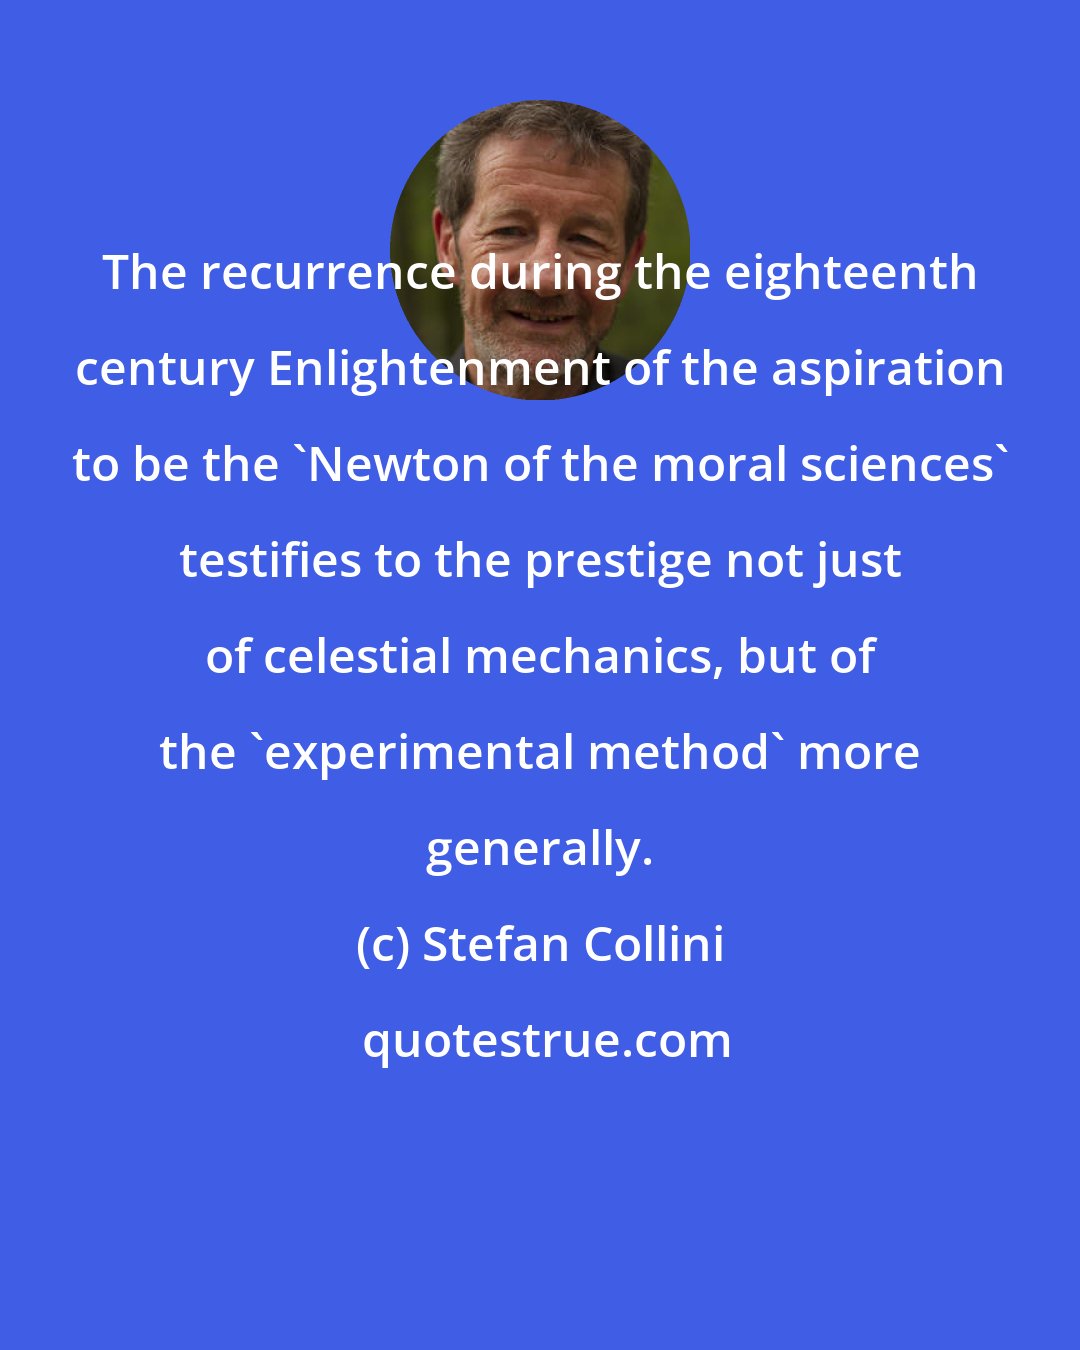 Stefan Collini: The recurrence during the eighteenth century Enlightenment of the aspiration to be the 'Newton of the moral sciences' testifies to the prestige not just of celestial mechanics, but of the 'experimental method' more generally.